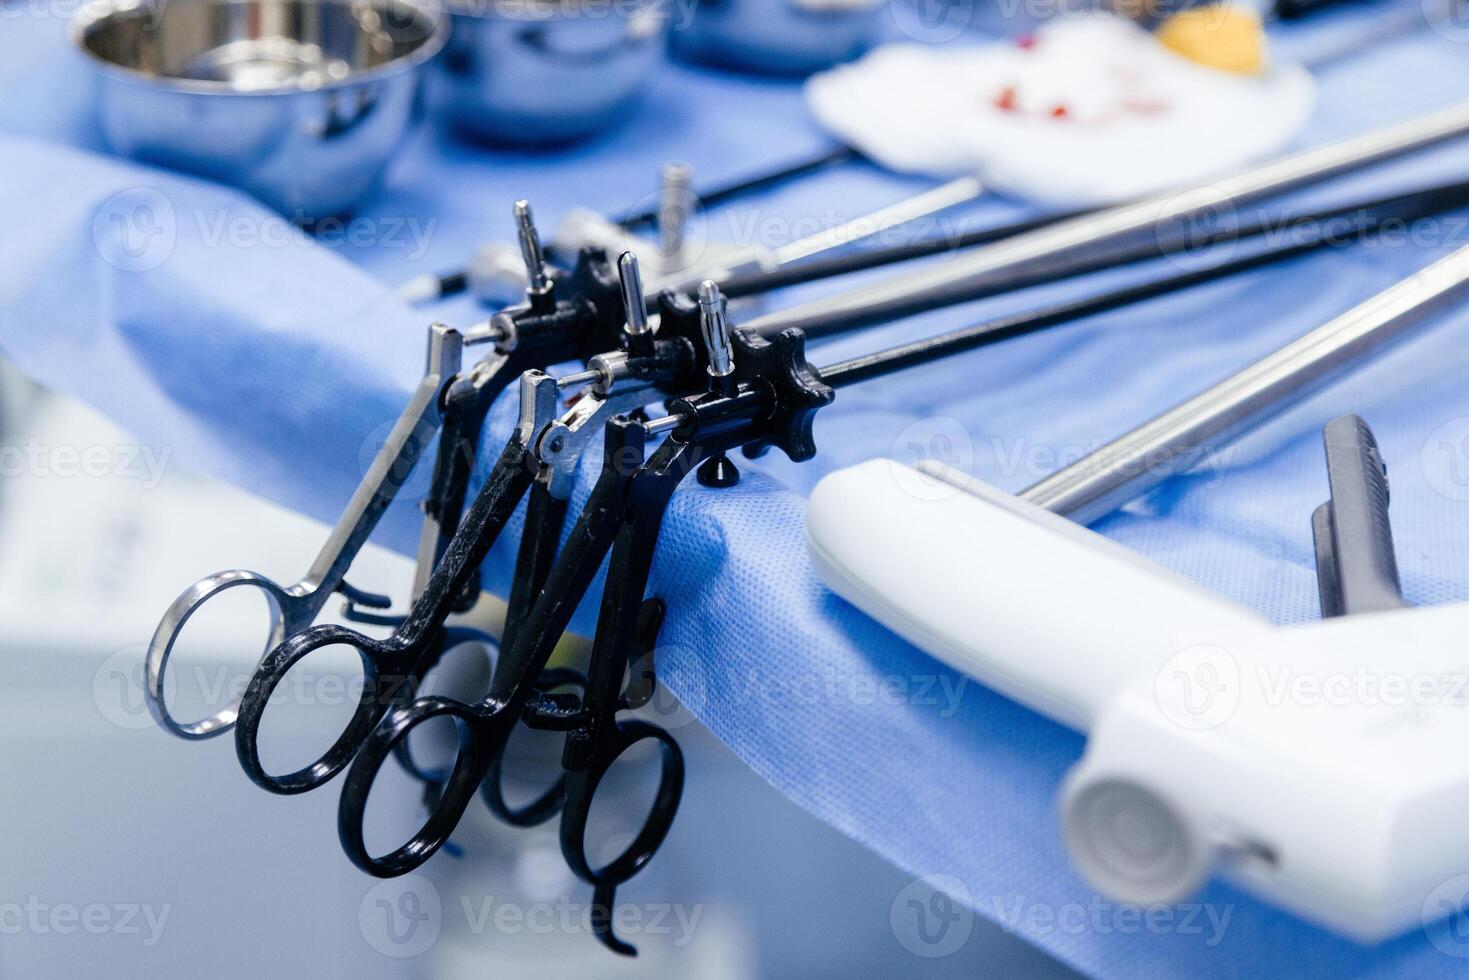 Preparation of sterile instruments for endoscopic surgery. Instruments for gastroscopy and colonoscopy close-up. High quality photo